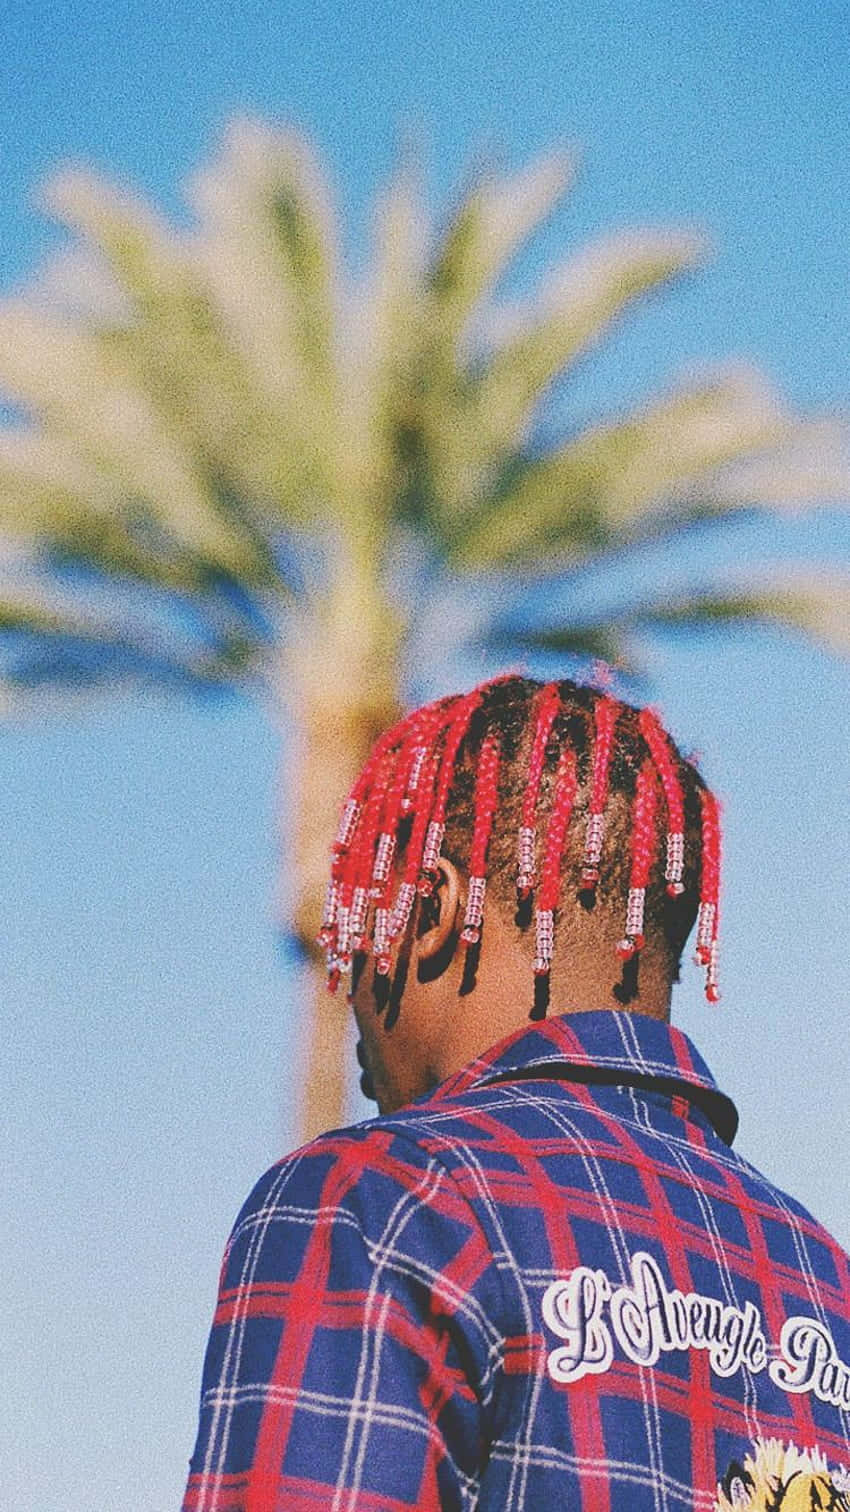 Rapper Lil Yachty performs at the MAXIMAS stage at Hangout Music Festival Wallpaper